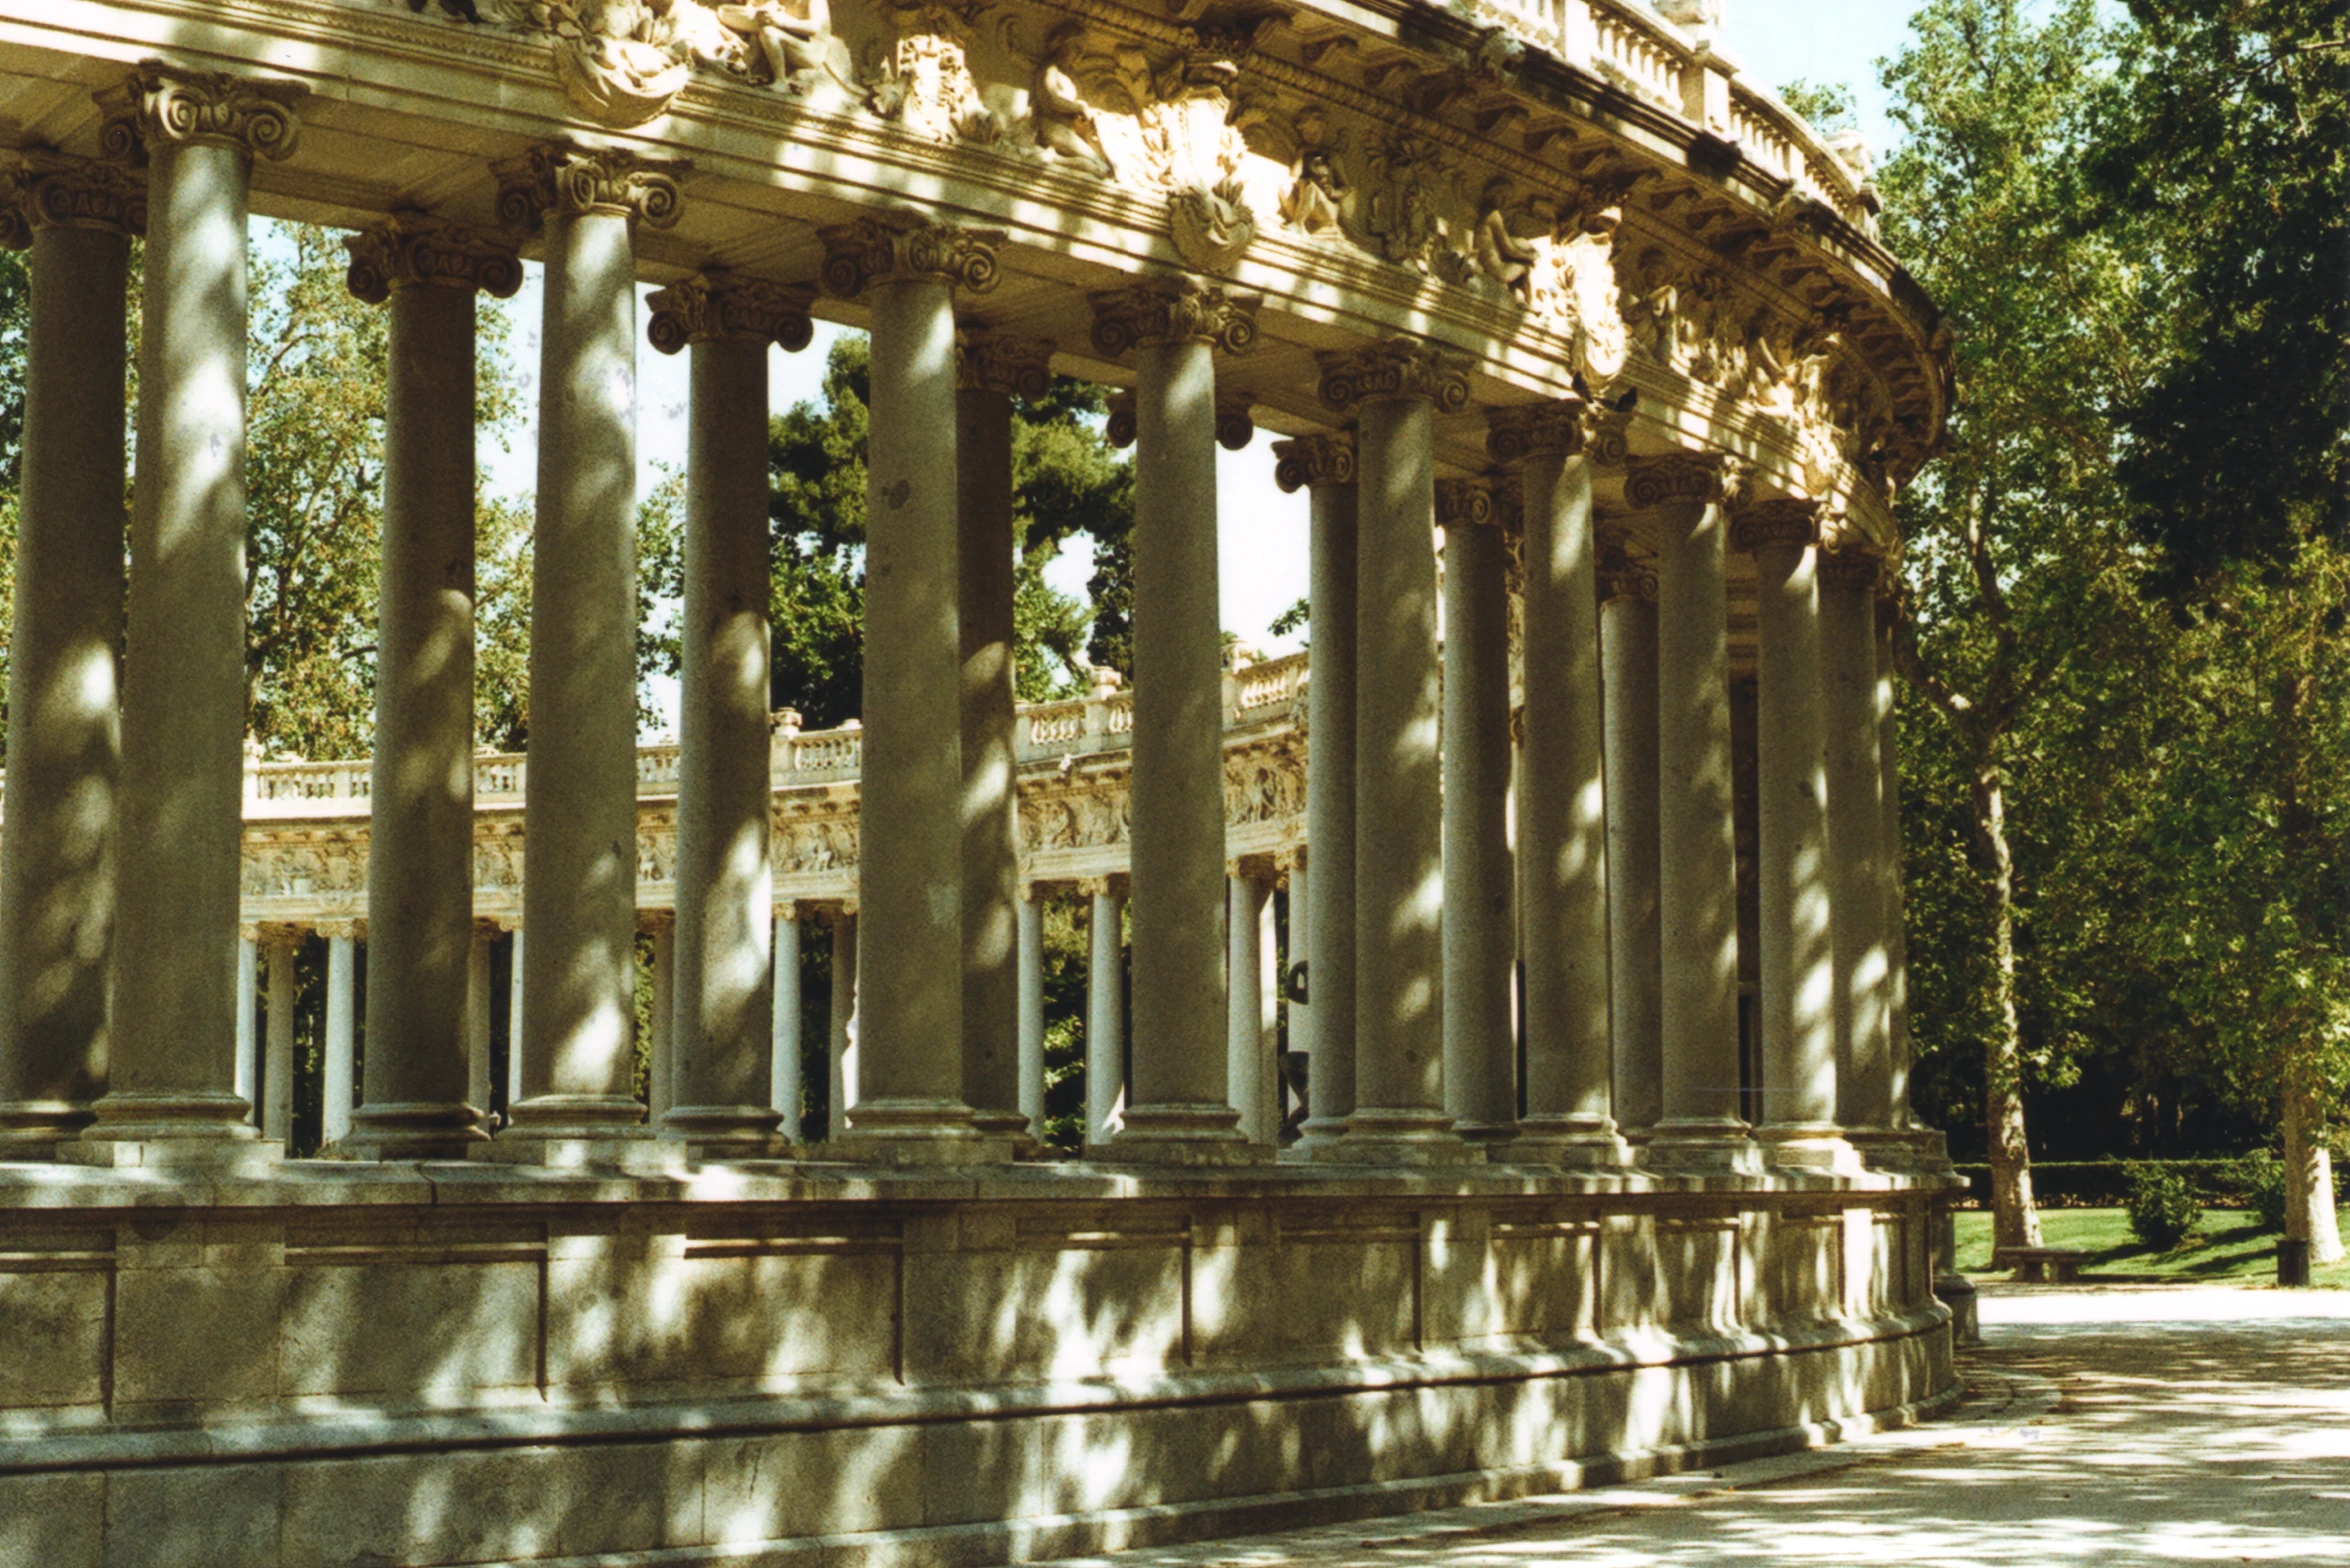 many columns at the end of an outdoor courtyard